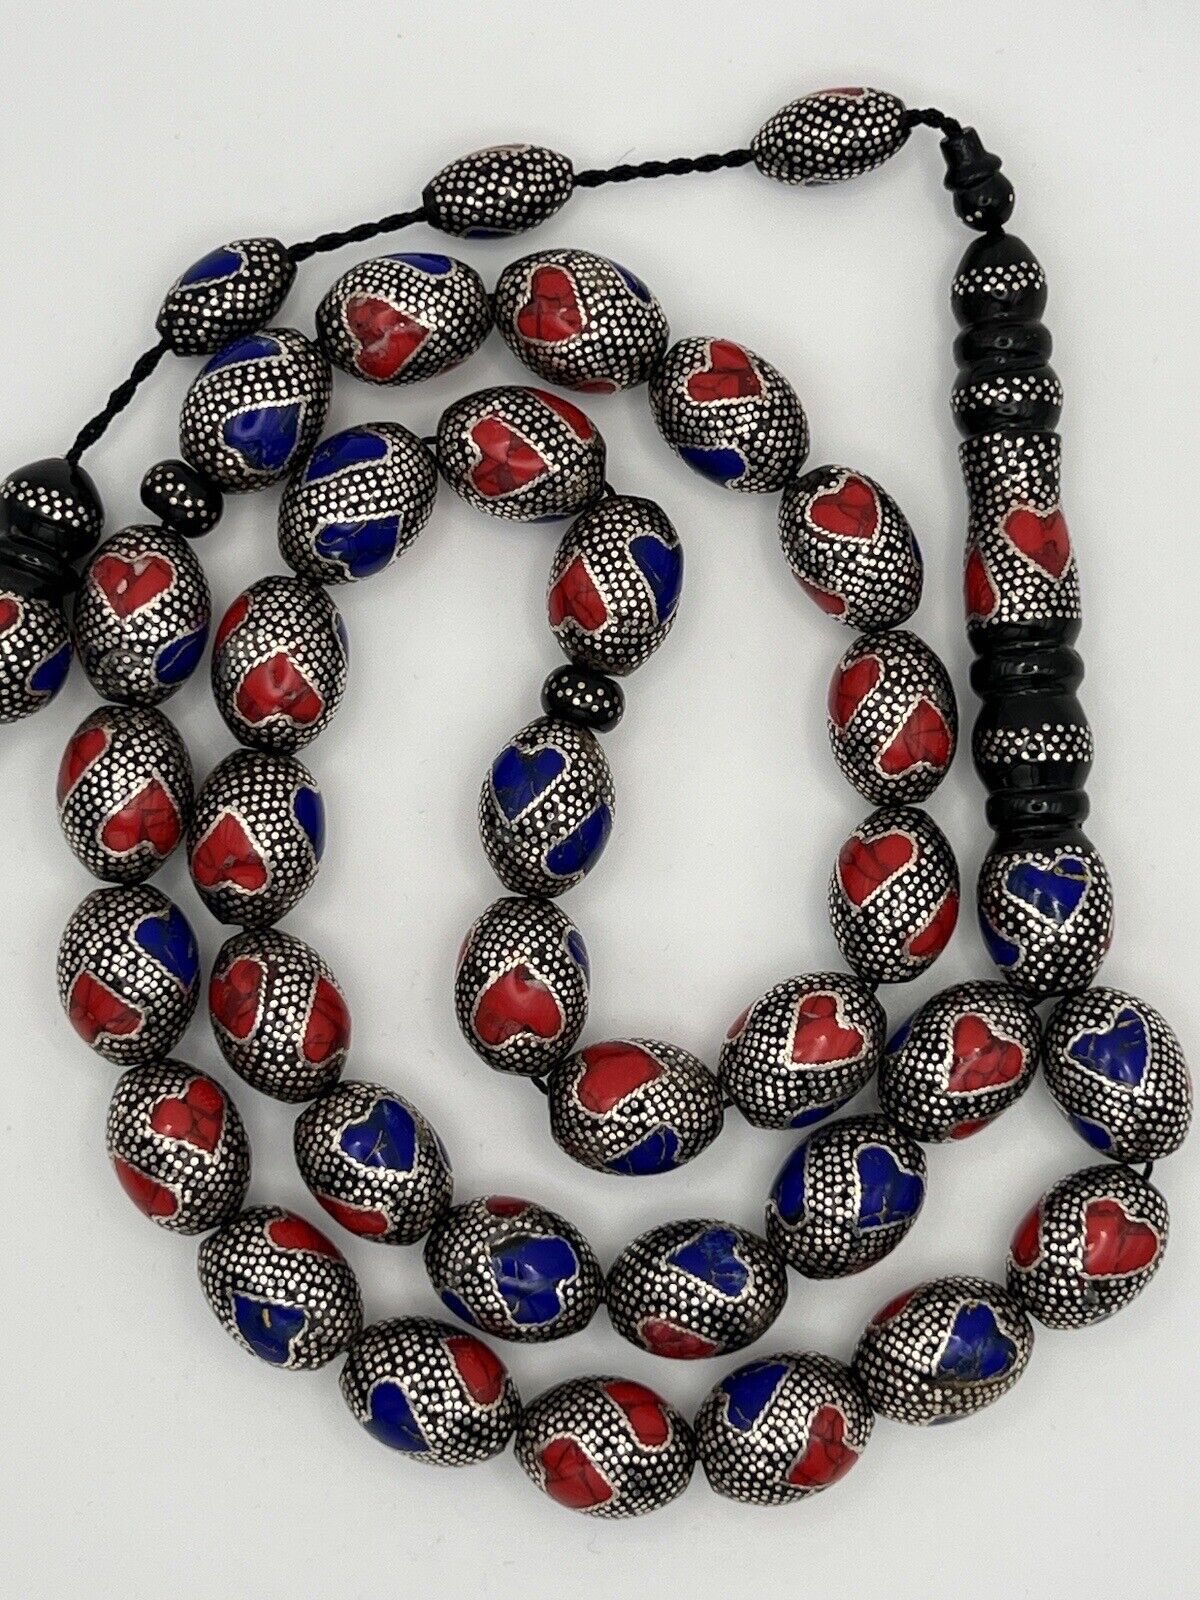 Black Coral Yusr Prayer Beads Inlaid Silver 925 Red Coral And Lapis Lazuli